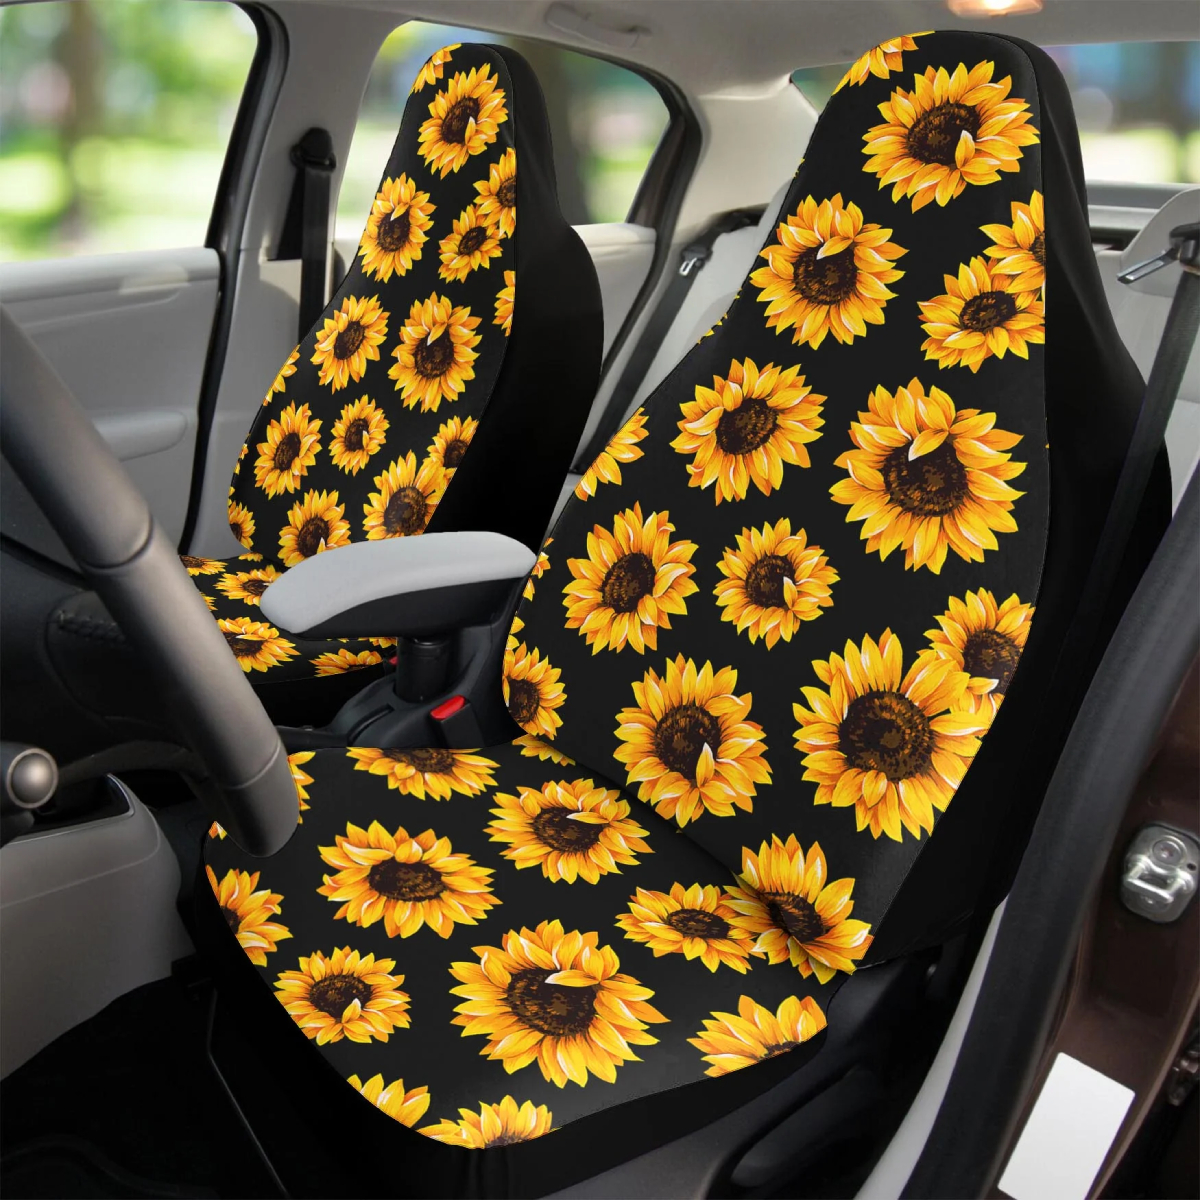 sunflower seat covers, sunflower car seat covers, sunflower car seat, sunflower seat covers front and back, car seat covers sunflower, sunflower truck seat covers, sunflower back seat cover, sunflower seat belt cover, amazon sunflower seat covers, sunflower steering wheel cover and seat covers, sunflower jeep seat covers, sunflower seat covers amazon, sunflower seat, sunflower bench seat cover, sunflower seat covers and steering wheel cover, seat covers sunflower, sunflower flag seat covers, sunflower car seat covers front and back, sunflower car seat cover and steering wheel, universal sunflower seat covers, red sunflower seat covers, jeep sunflower seat covers, sunflower car seat covers amazon, sunflower flag car seat covers, sunflower auto seat covers, tie dye sunflower seat covers, sunflower back seat car covers, sunflower and flag seat covers, sunflower front and back seat covers, sunflower and american flag seat covers